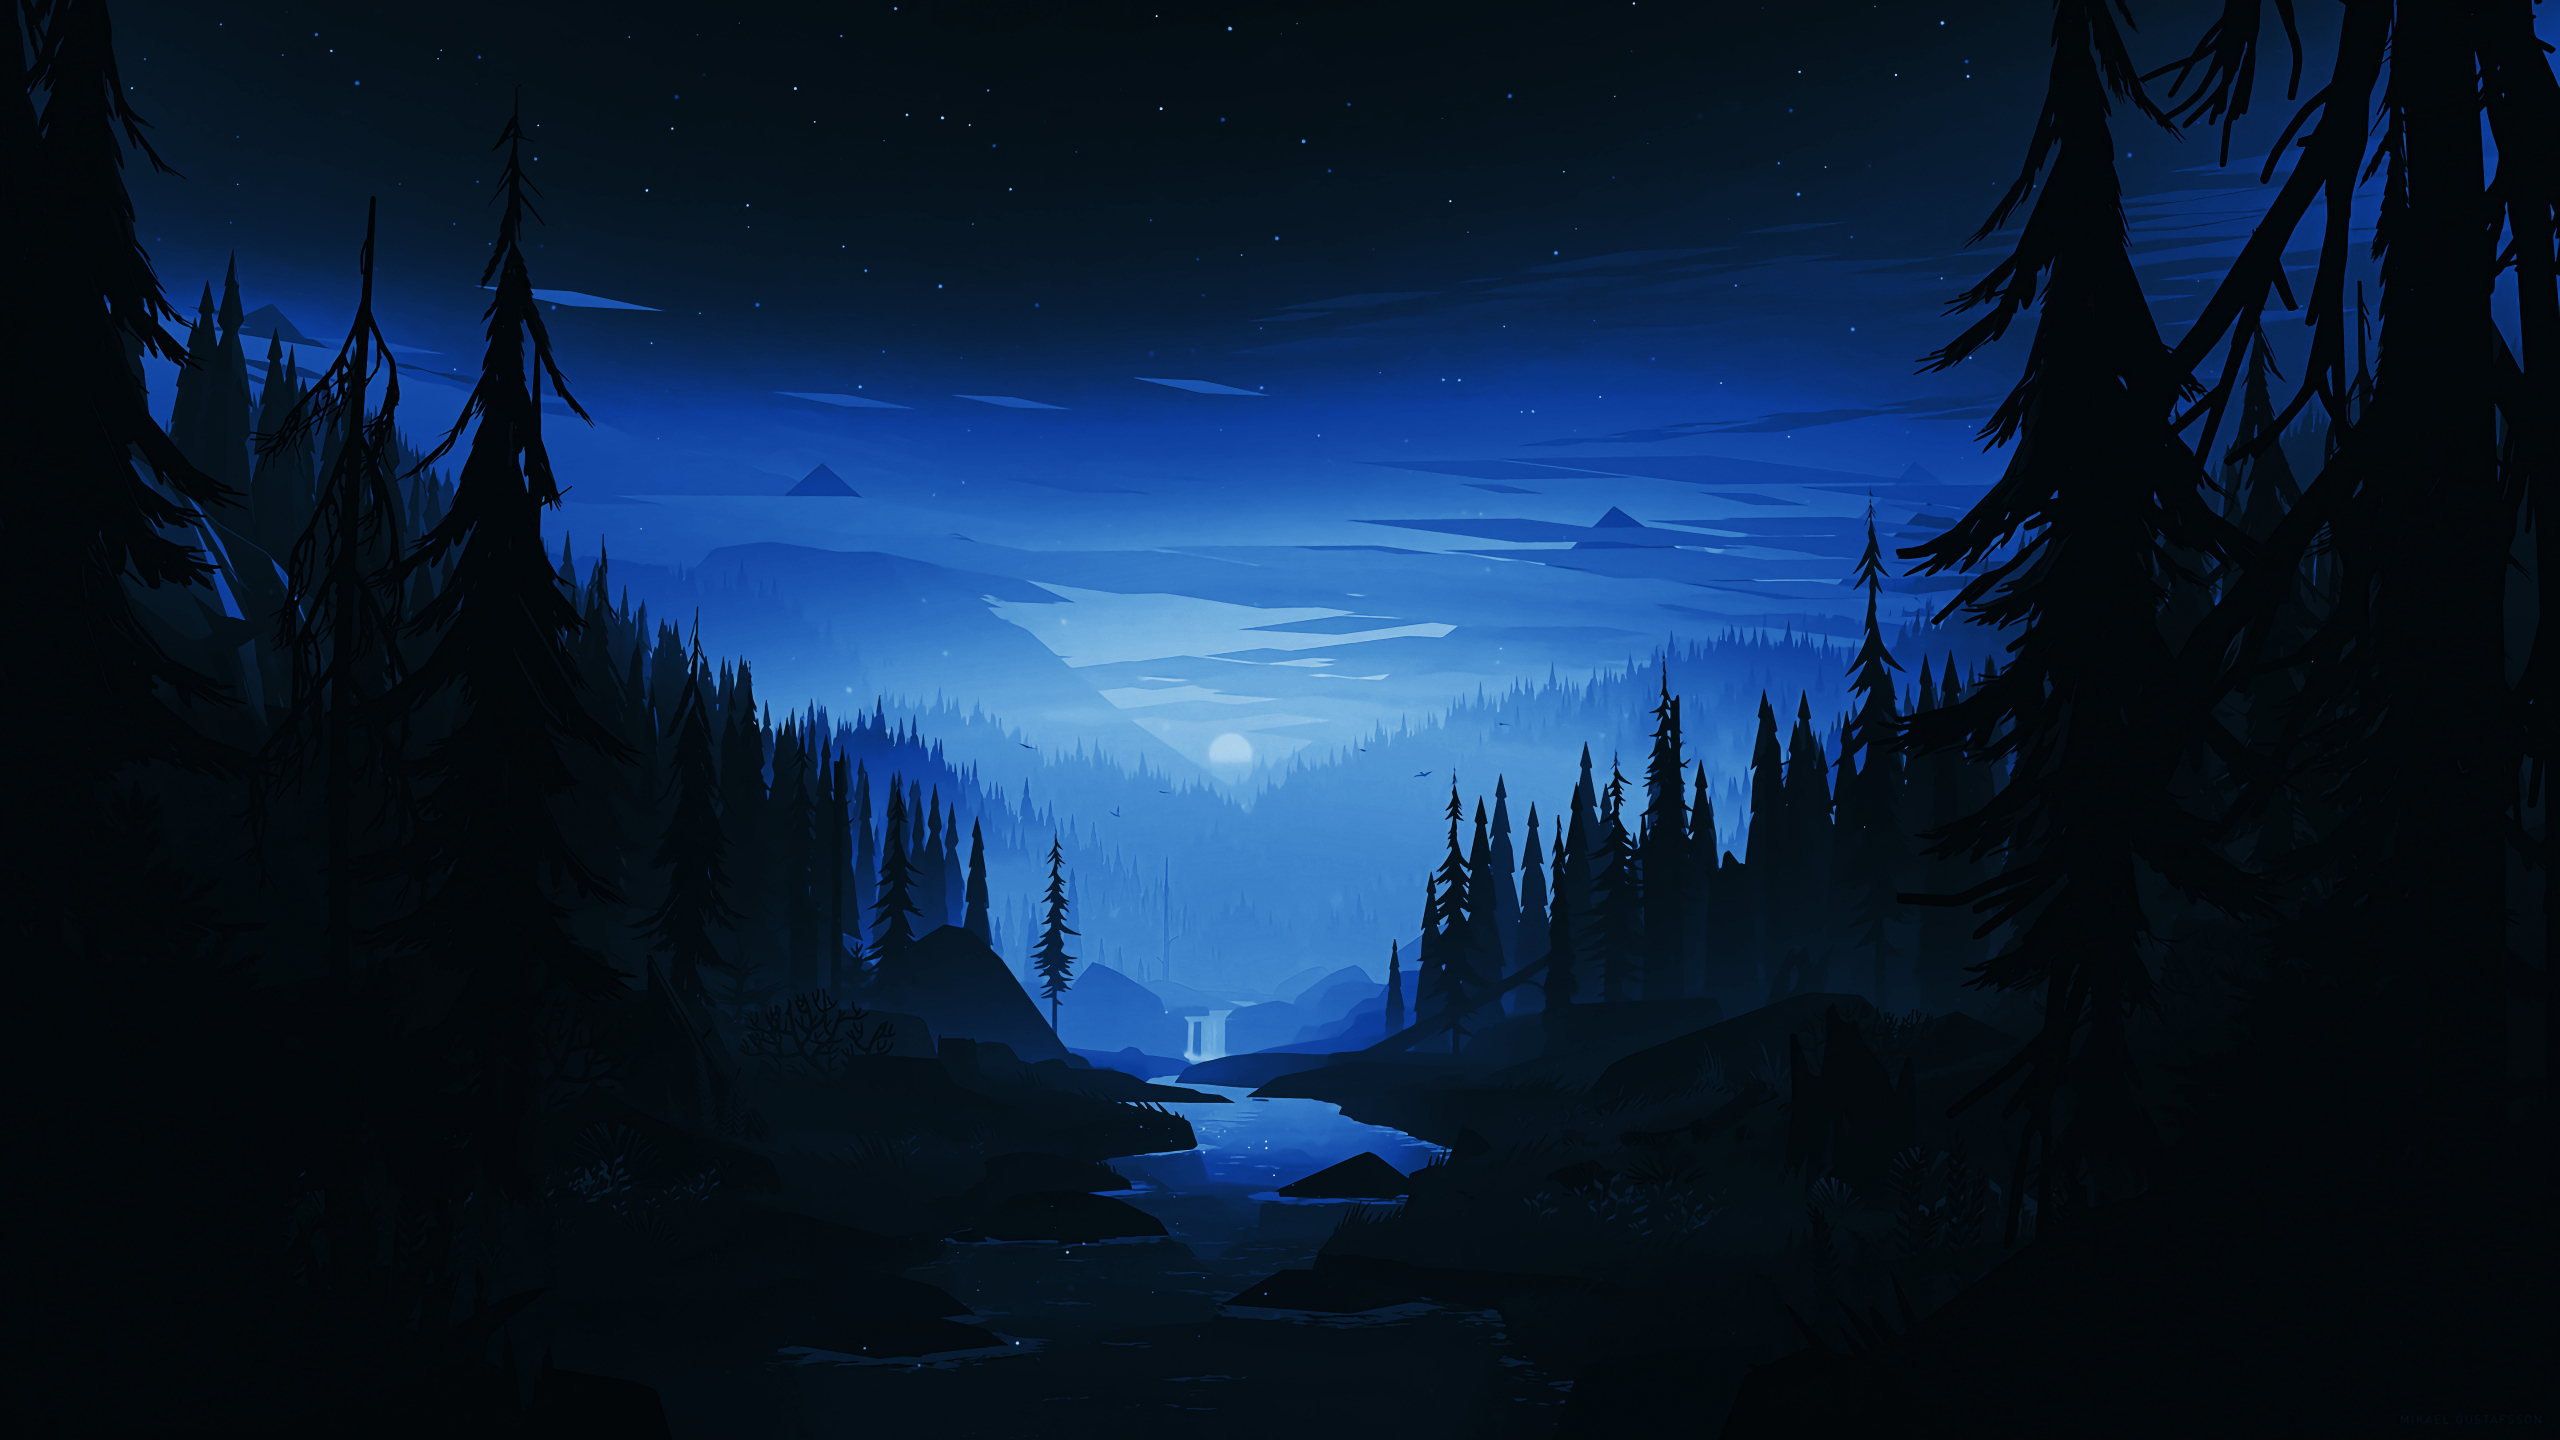 Discover the beauty of 2560x1440 desktop backgrounds in high resolution